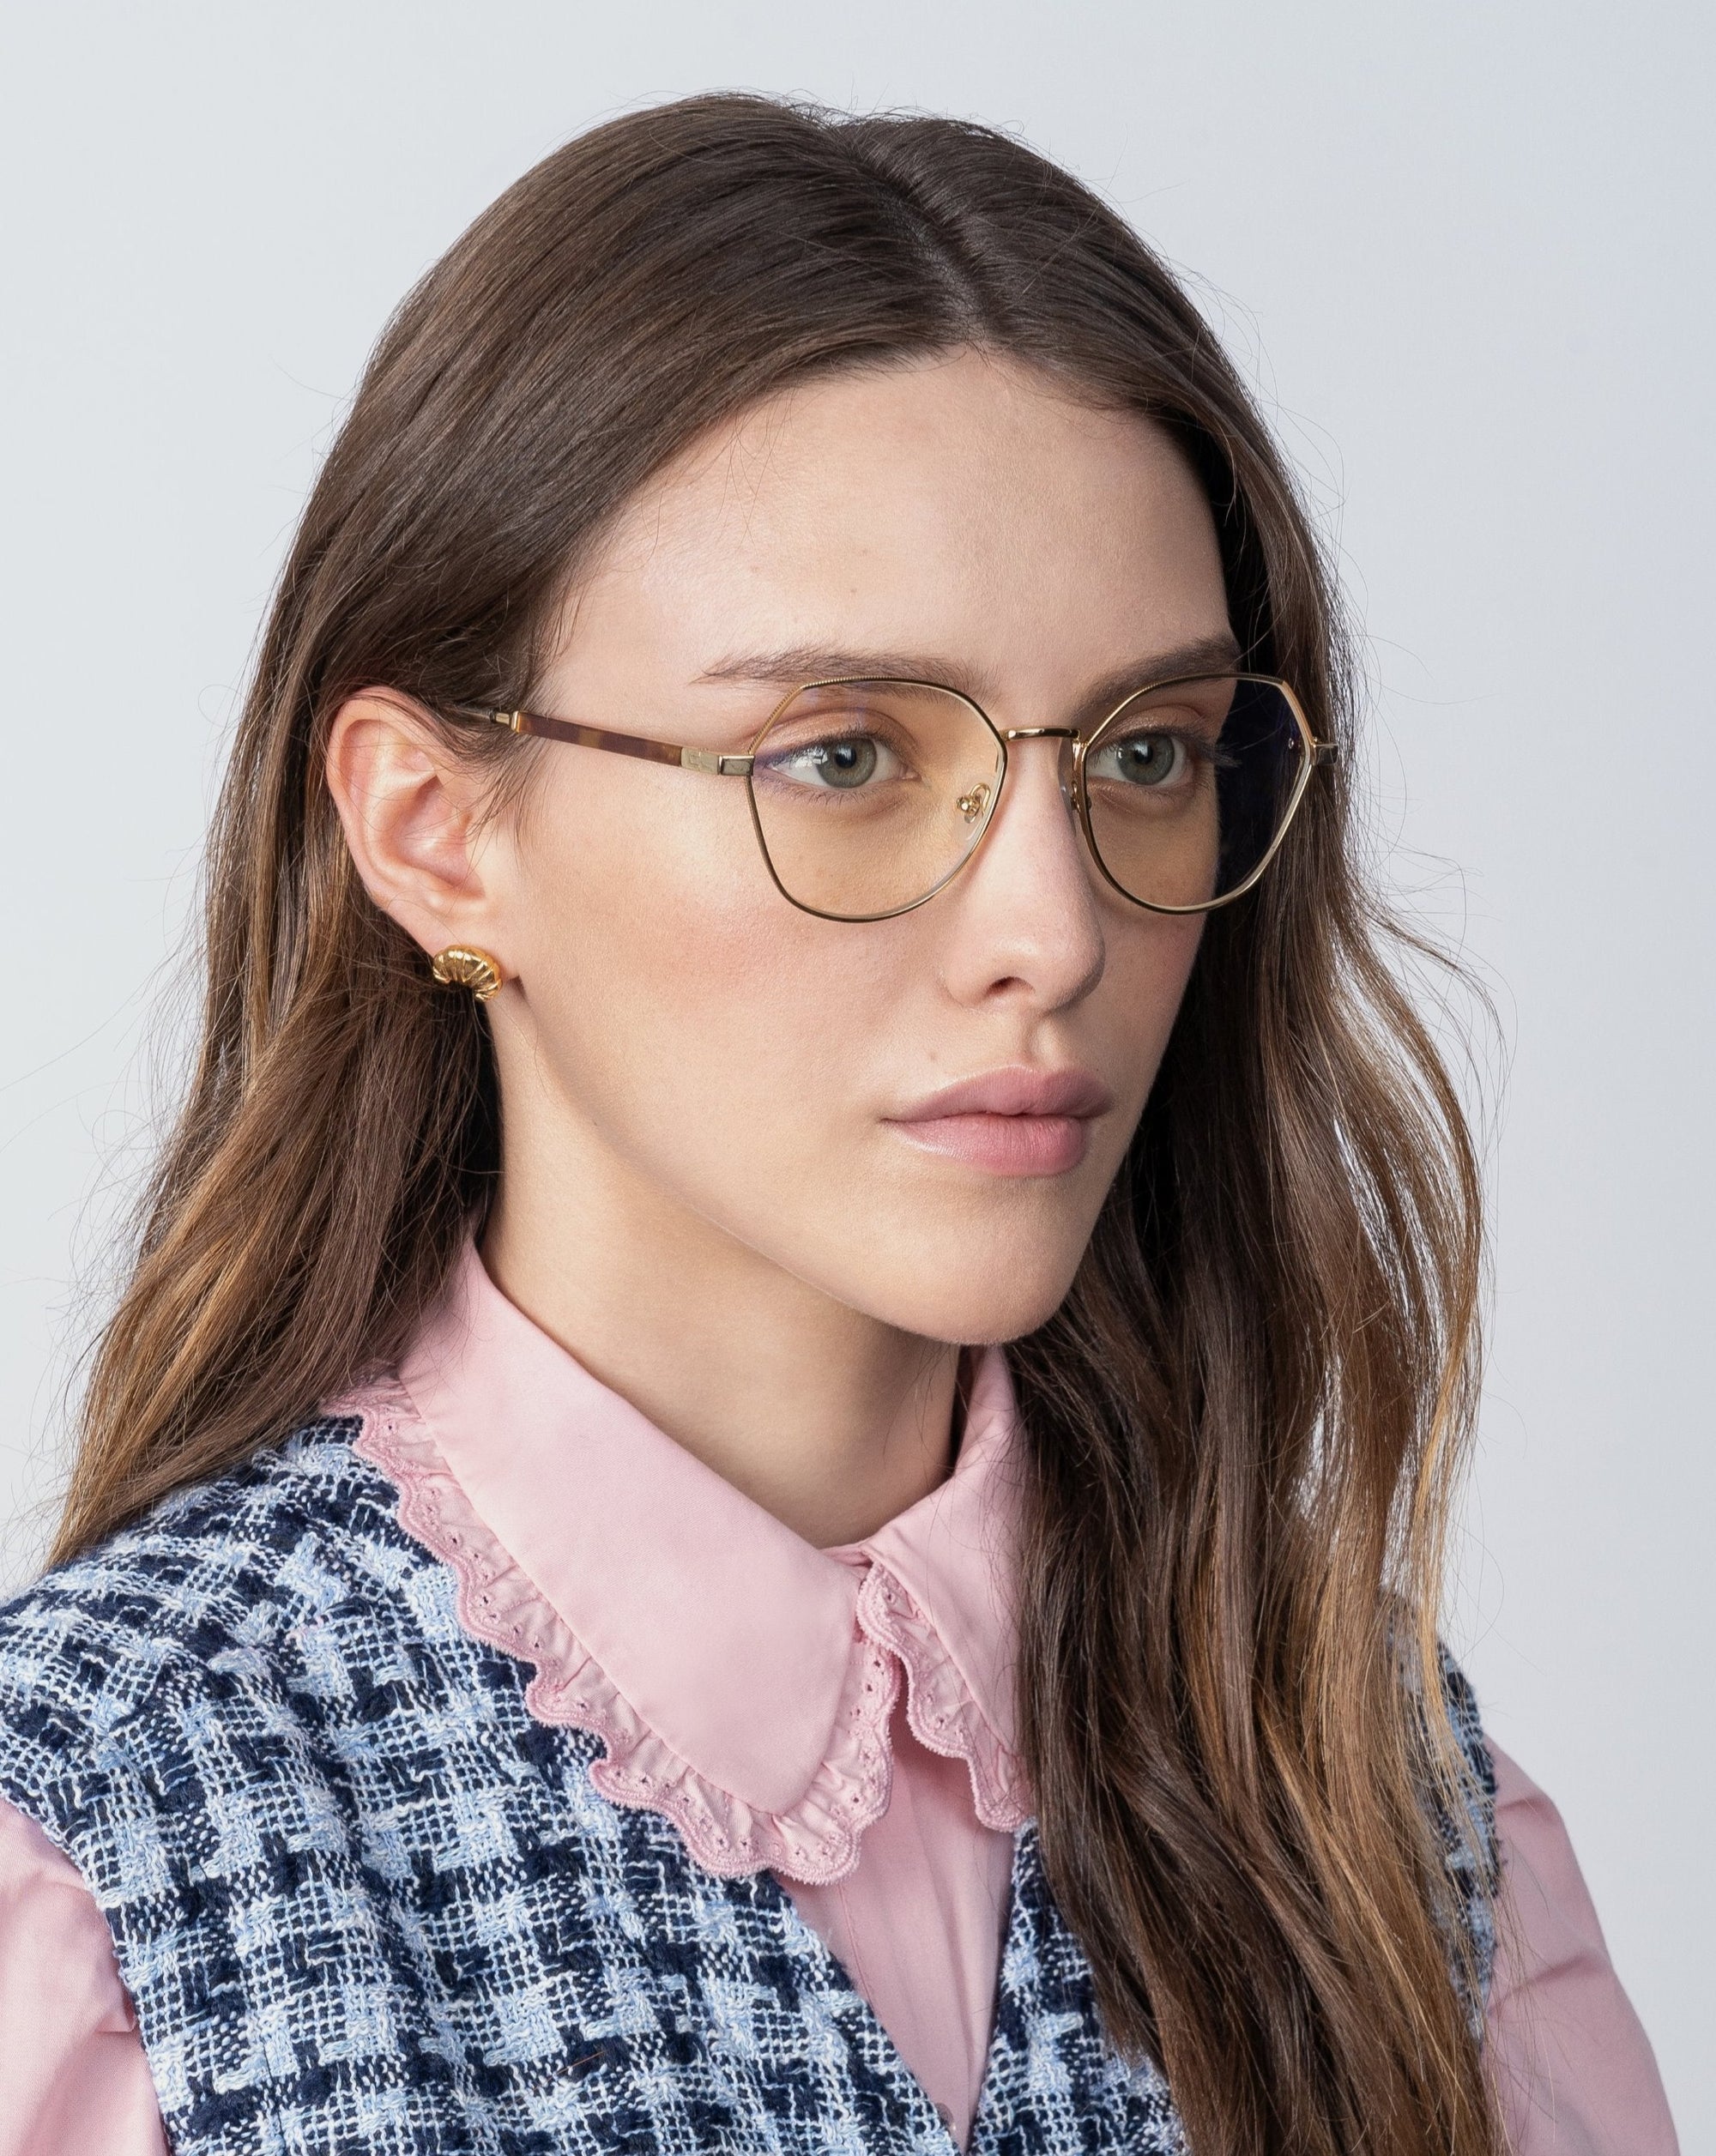 A woman with long, brown hair wearing 18-karat gold-plated glasses and gold earrings. She is dressed in a pink blouse with a lace collar under a blue and white checkered vest. Her glasses have Orchard blue light filter prescription lenses by For Art&#39;s Sake®. She has a calm, neutral expression and is facing slightly to the right.